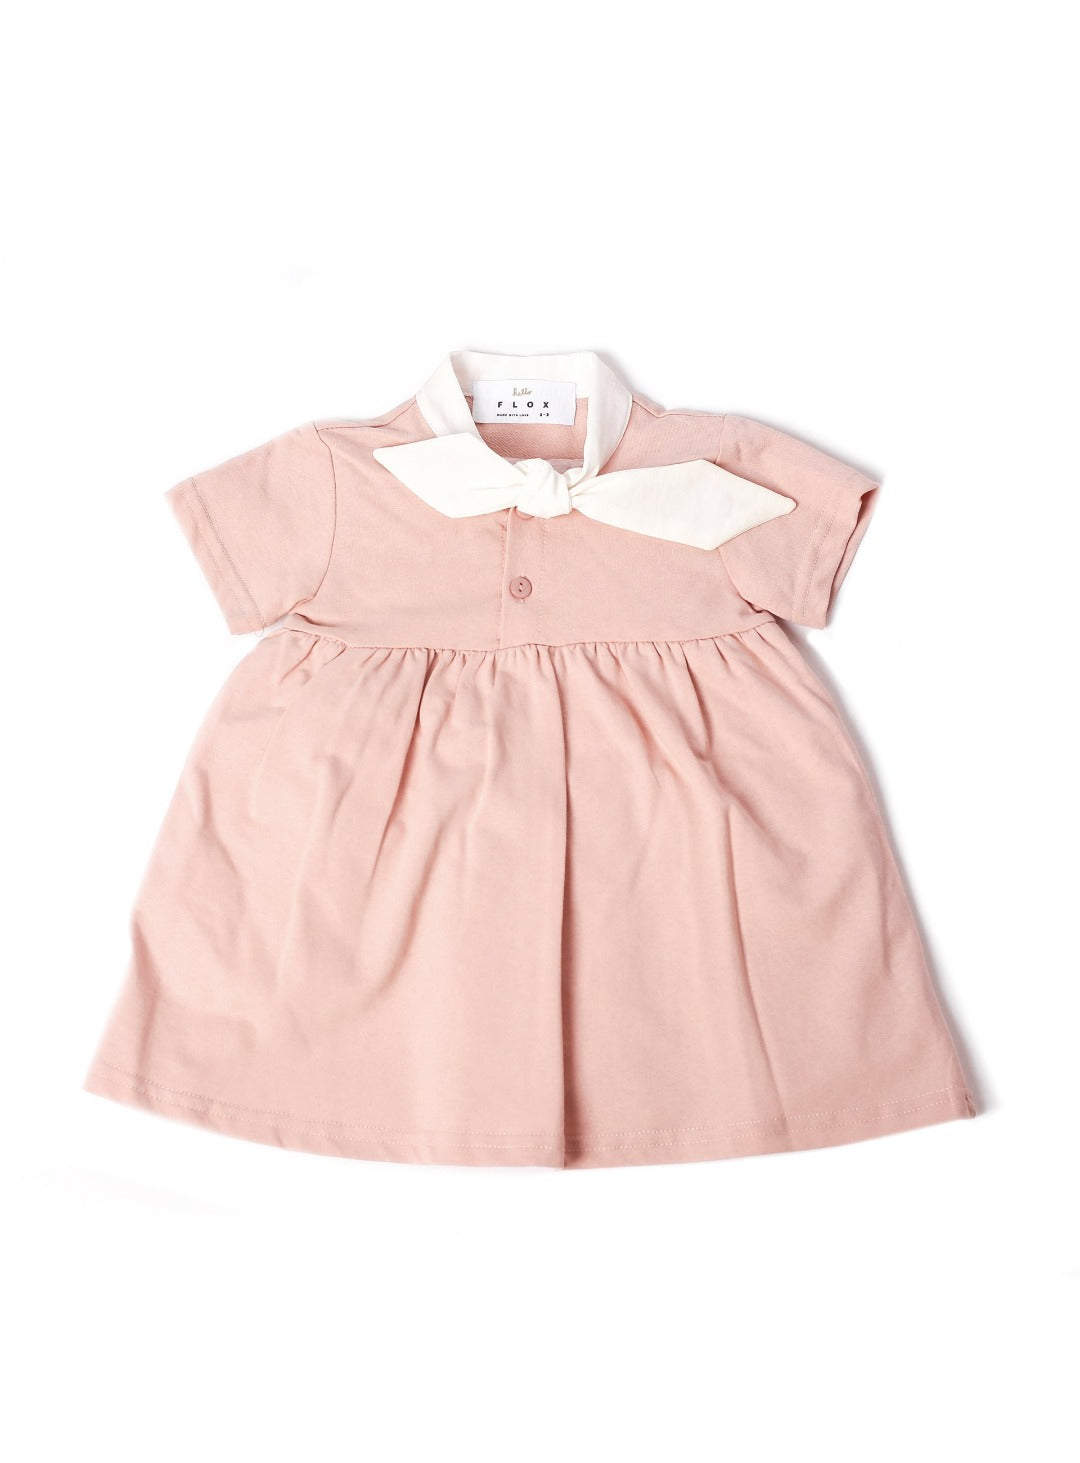 ballerina pink dress with white bow collar